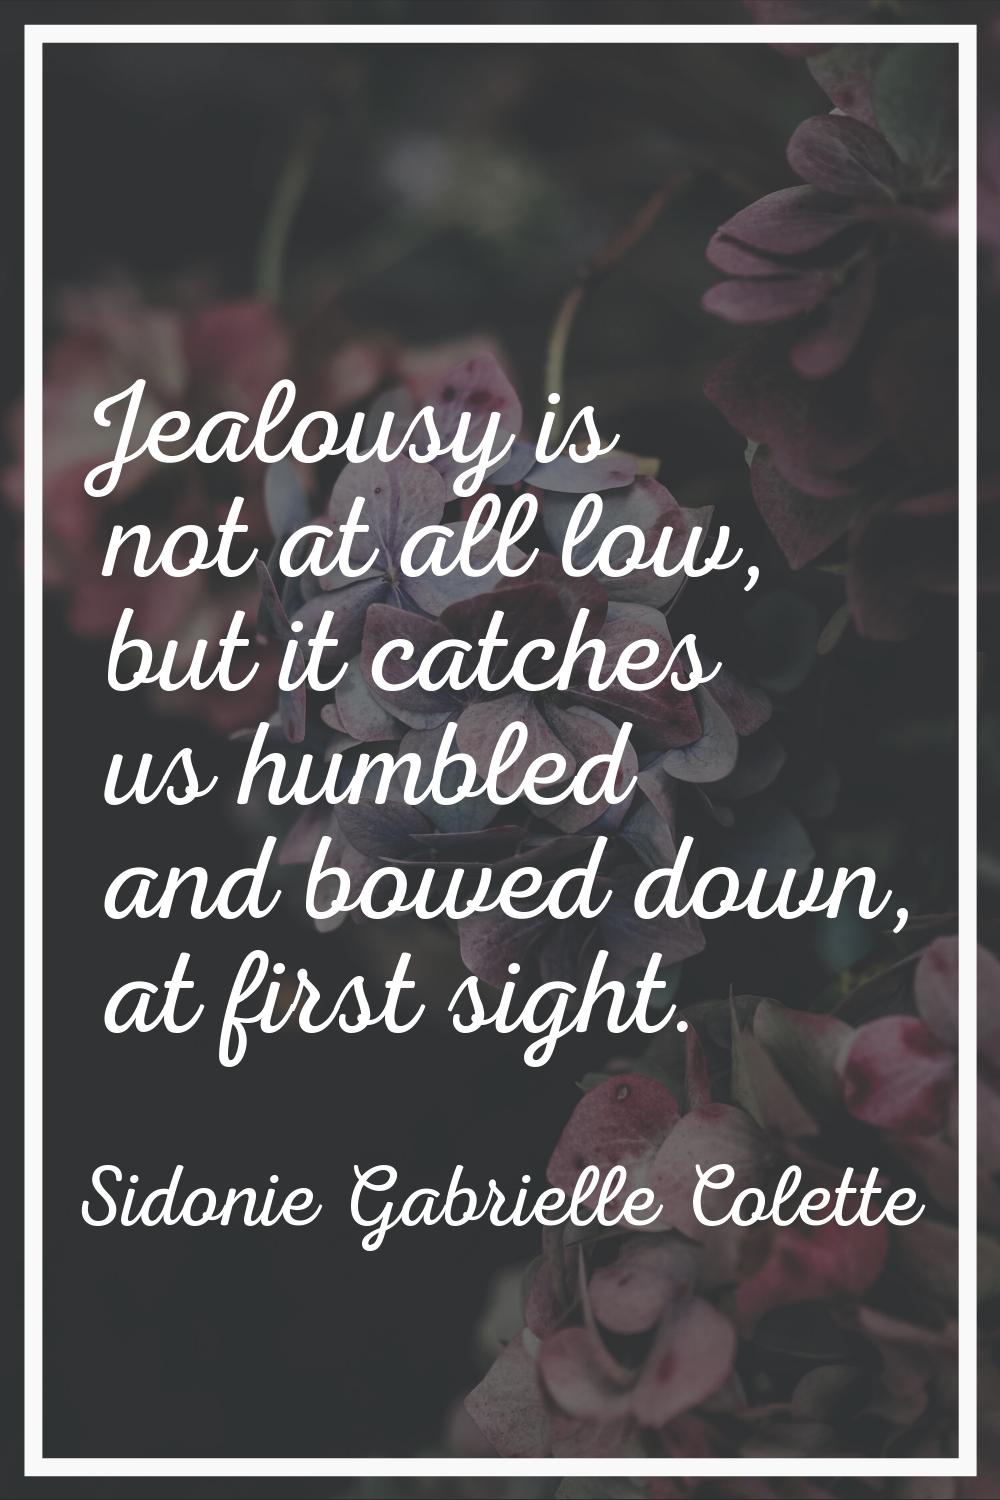 Jealousy is not at all low, but it catches us humbled and bowed down, at first sight.